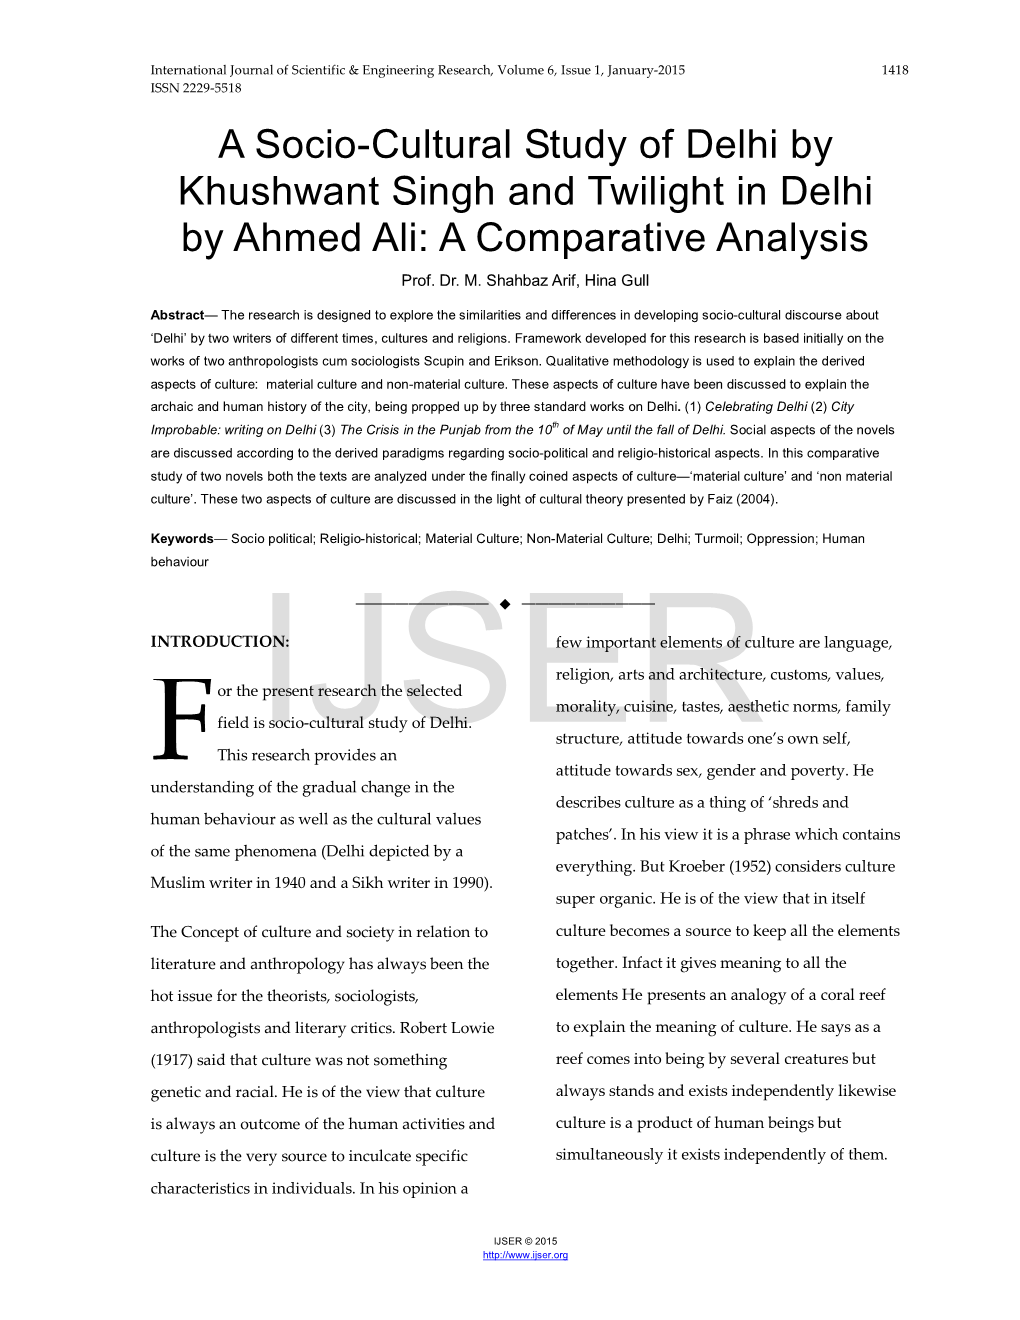 A Socio-Cultural Study of Delhi by Khushwant Singh and Twilight in Delhi by Ahmed Ali: a Comparative Analysis Prof